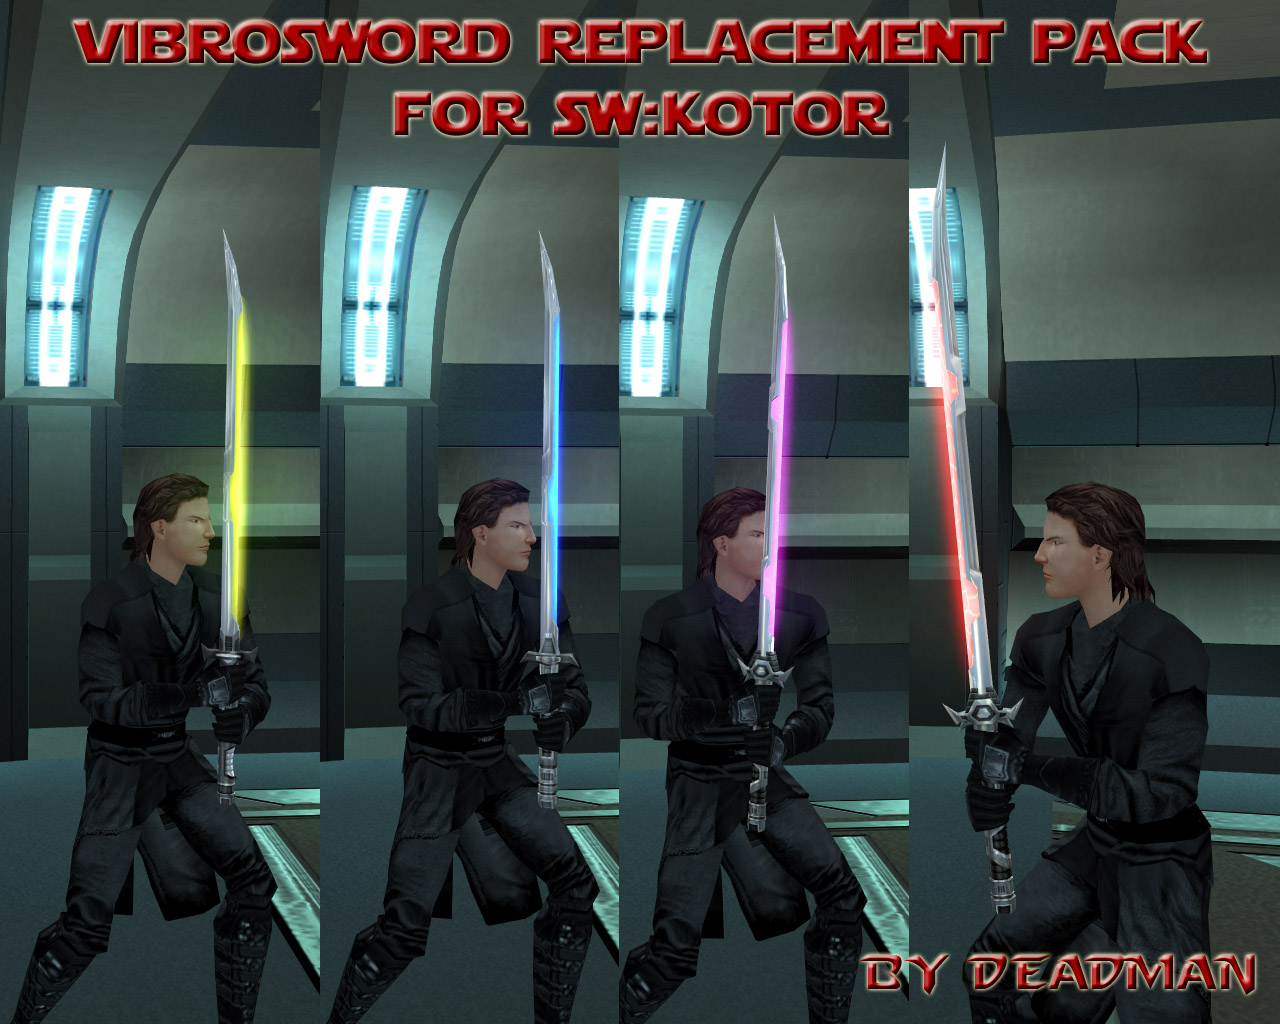 [k1]Vibrosword replacement pack